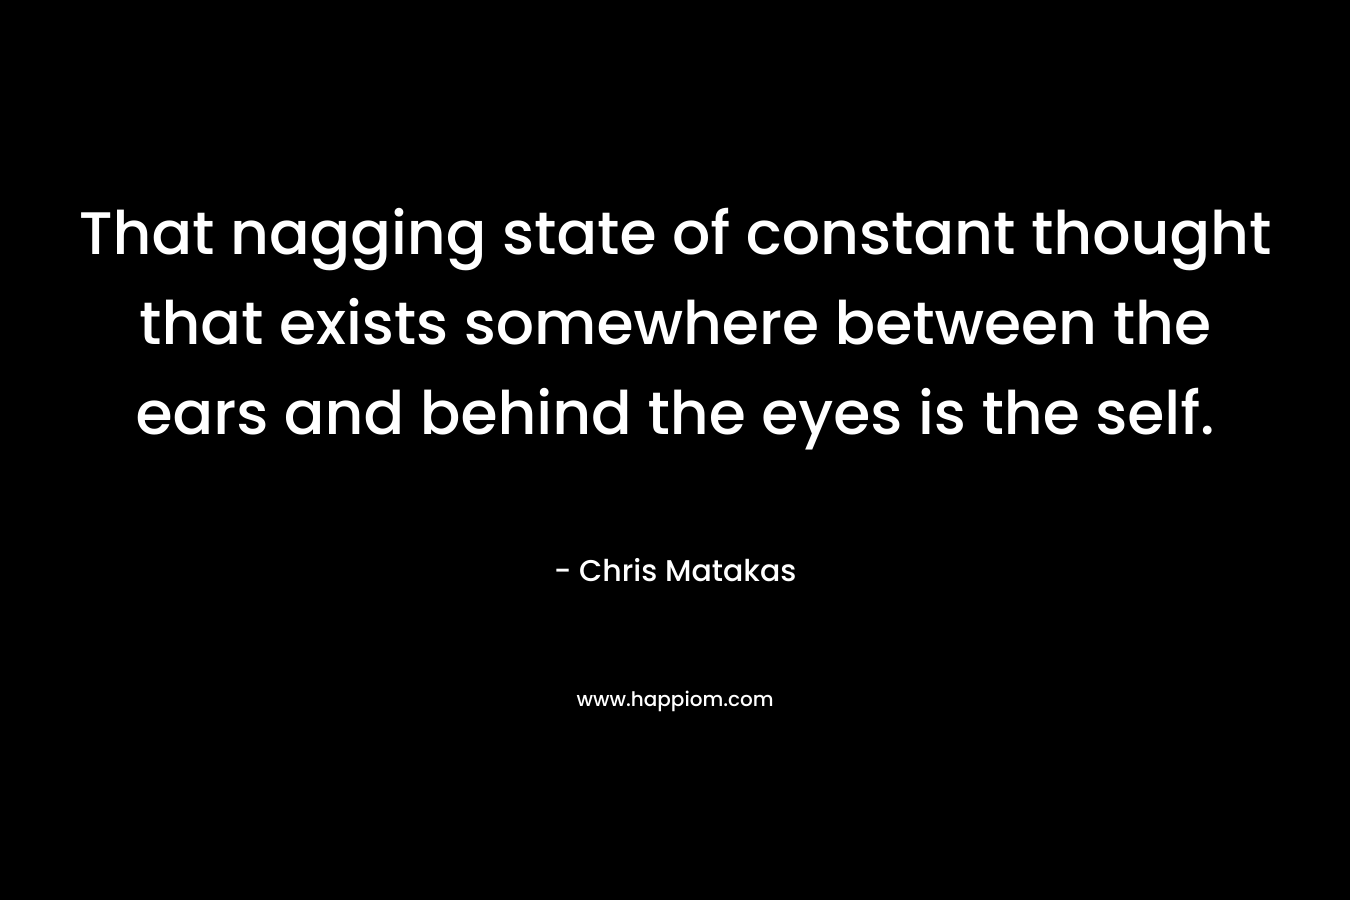 That nagging state of constant thought that exists somewhere between the ears and behind the eyes is the self. – Chris Matakas